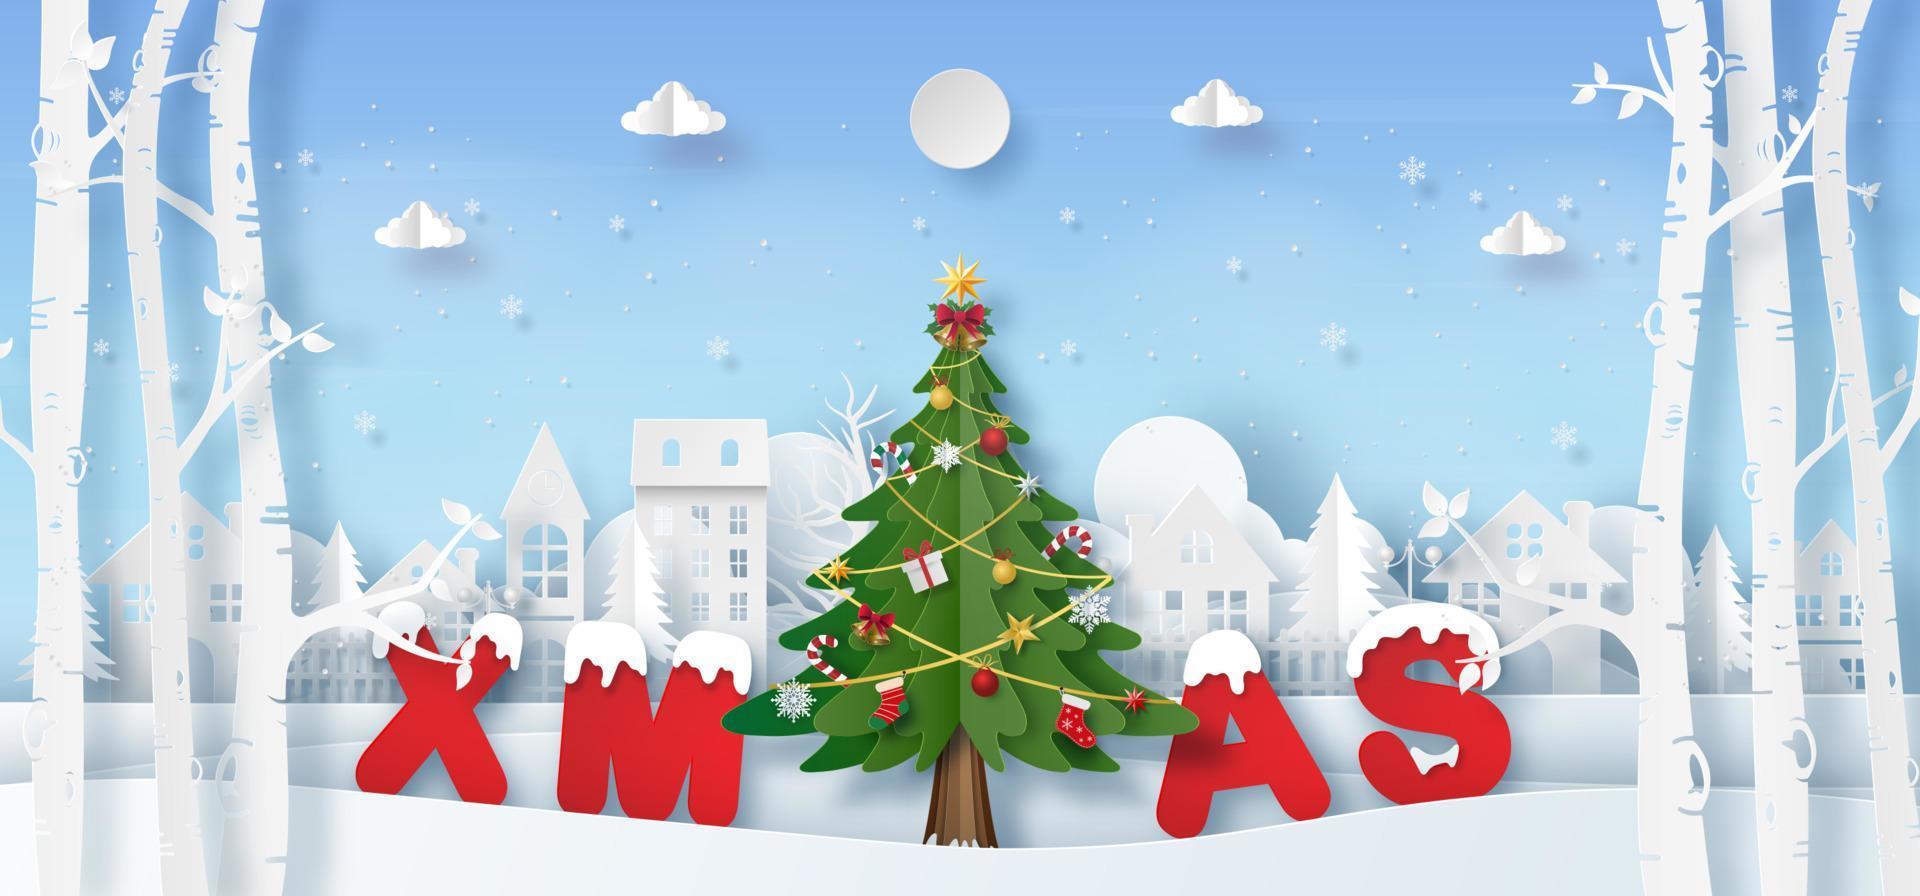 Christmas banner background, Origami Paper art of Christmas tree in the village with XMAS word, Merry Christmas and Happy New Year vector